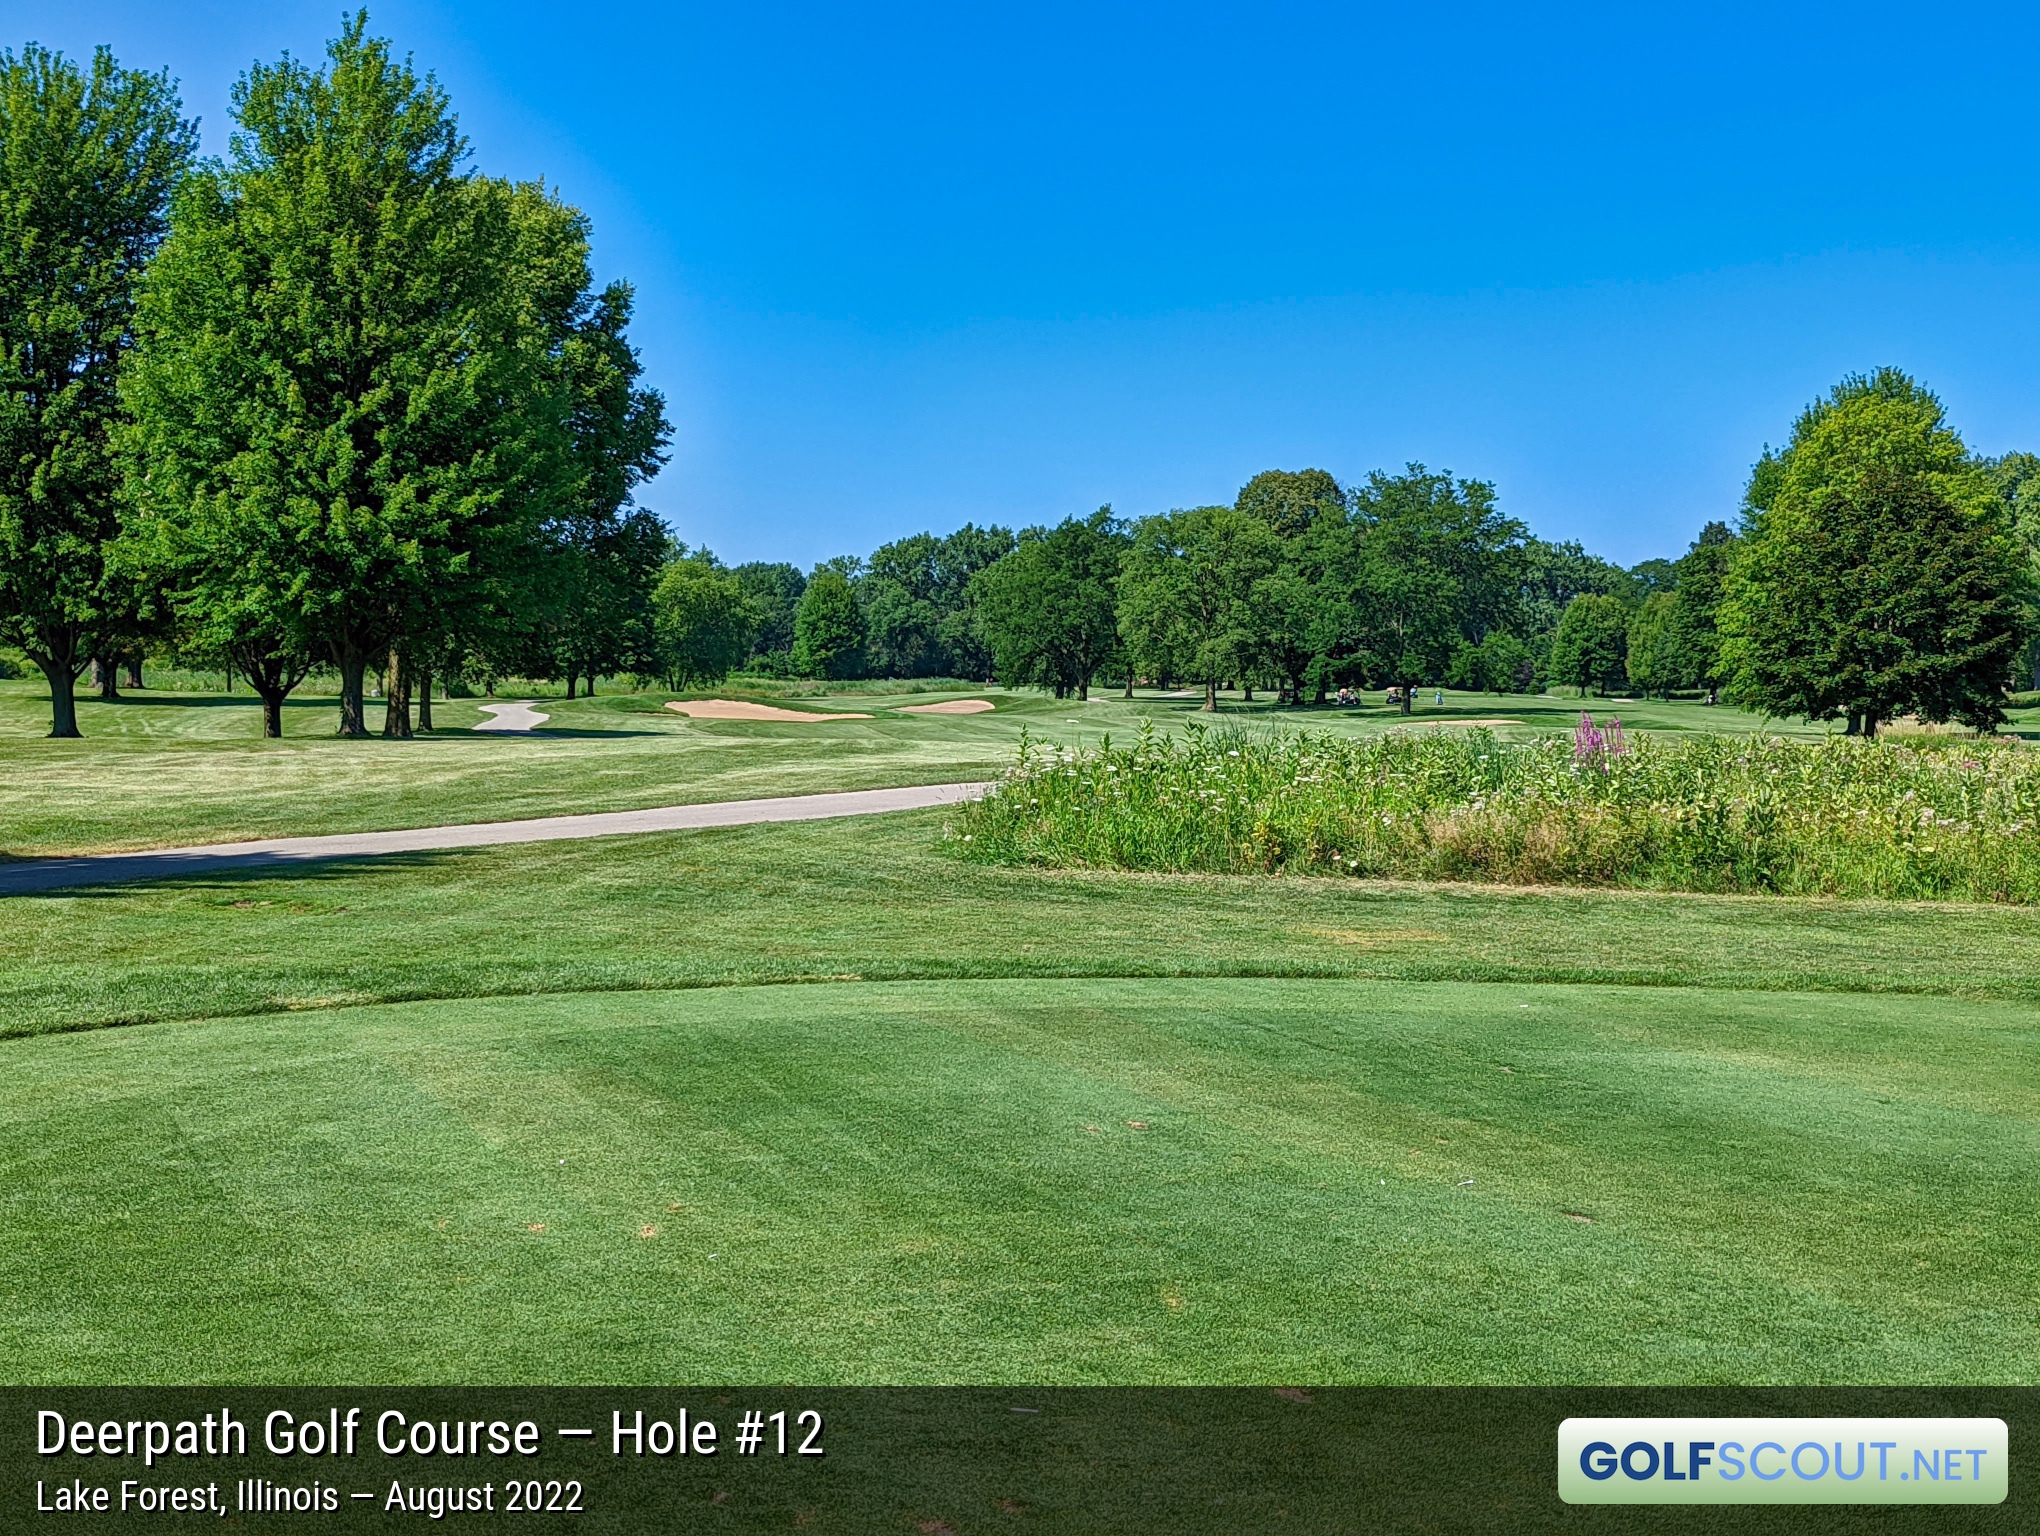 Photo of hole #12 at Deerpath Golf Course in Lake Forest, Illinois. 